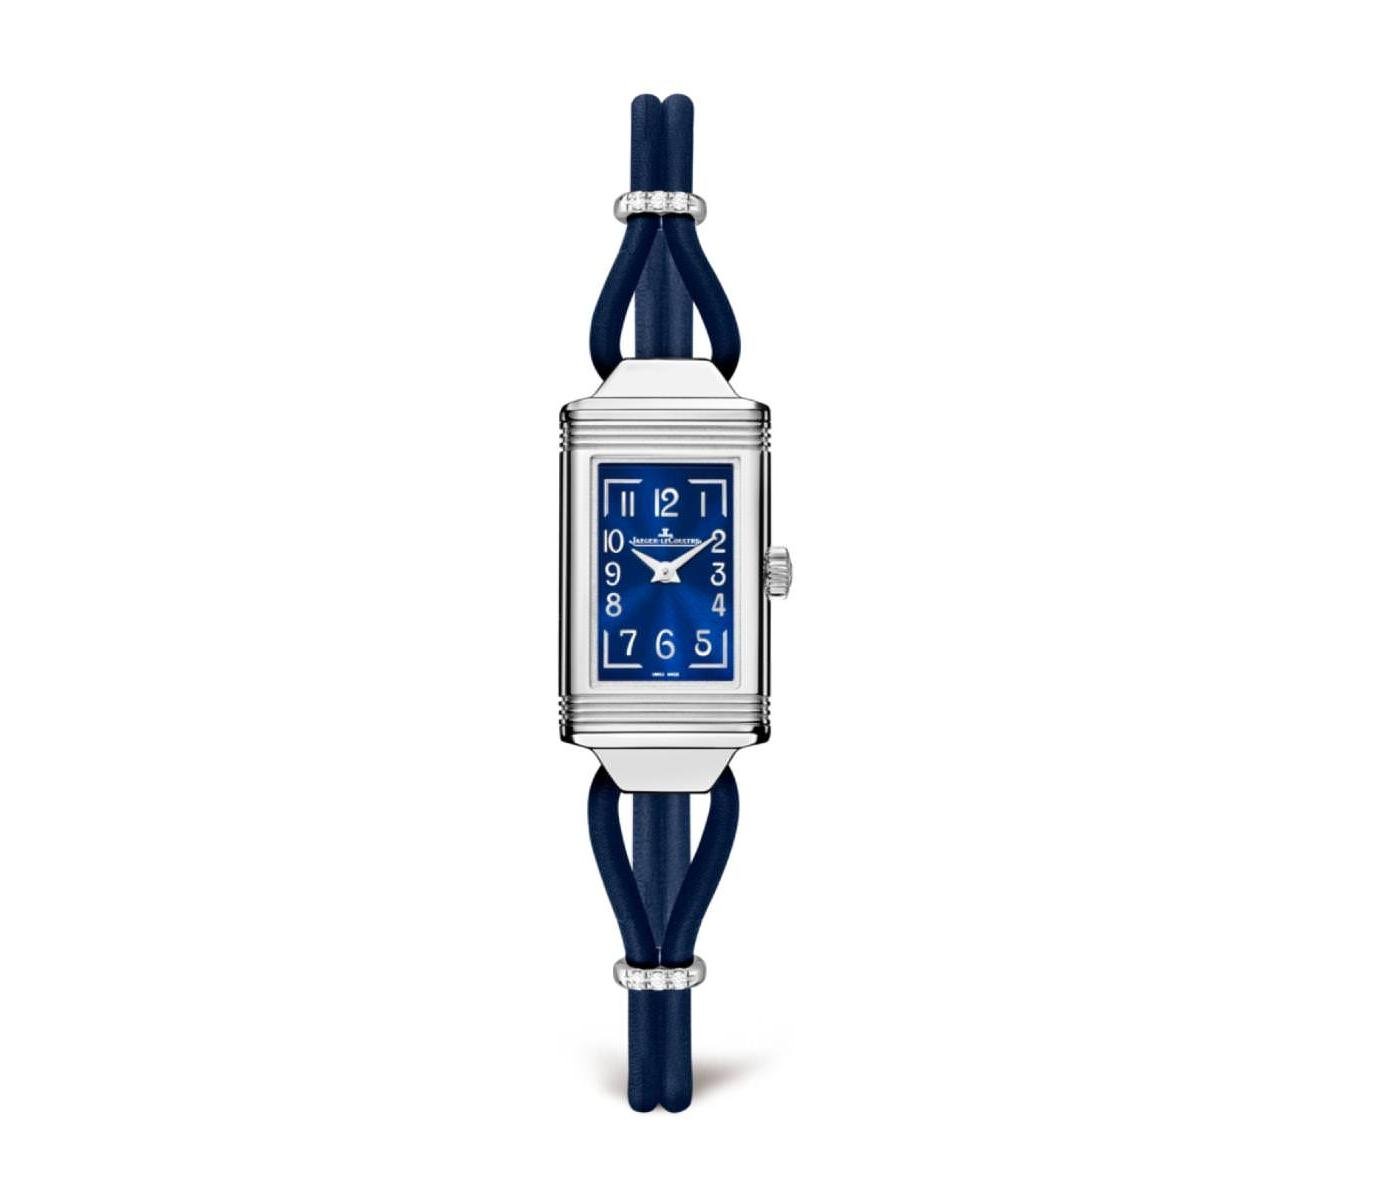 Watch by Jaeger-LeCoultre